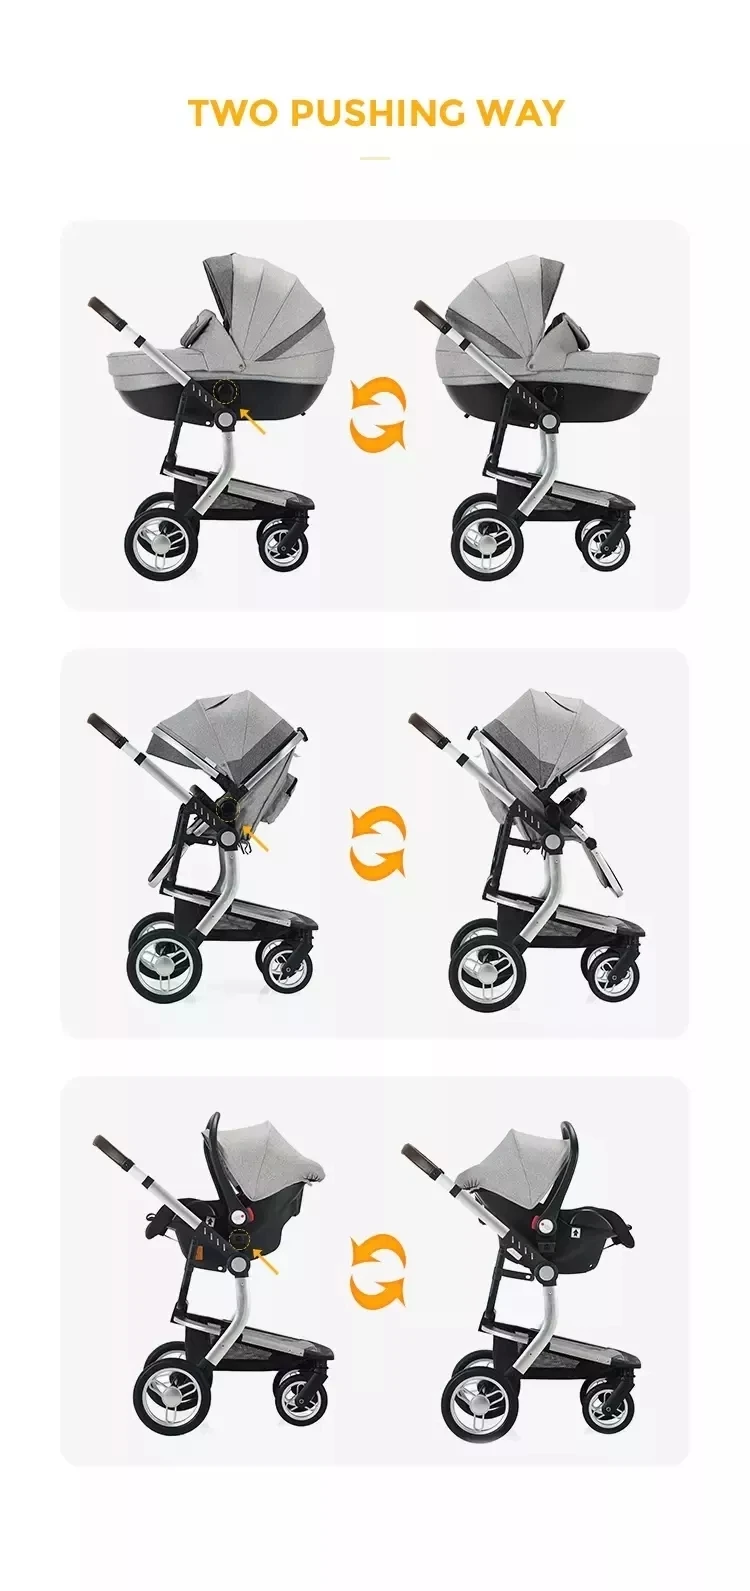 2022 High Landscape and Fashional Pram Wholesale European Infant Cart Foldable 3 In 1 baby Stroller